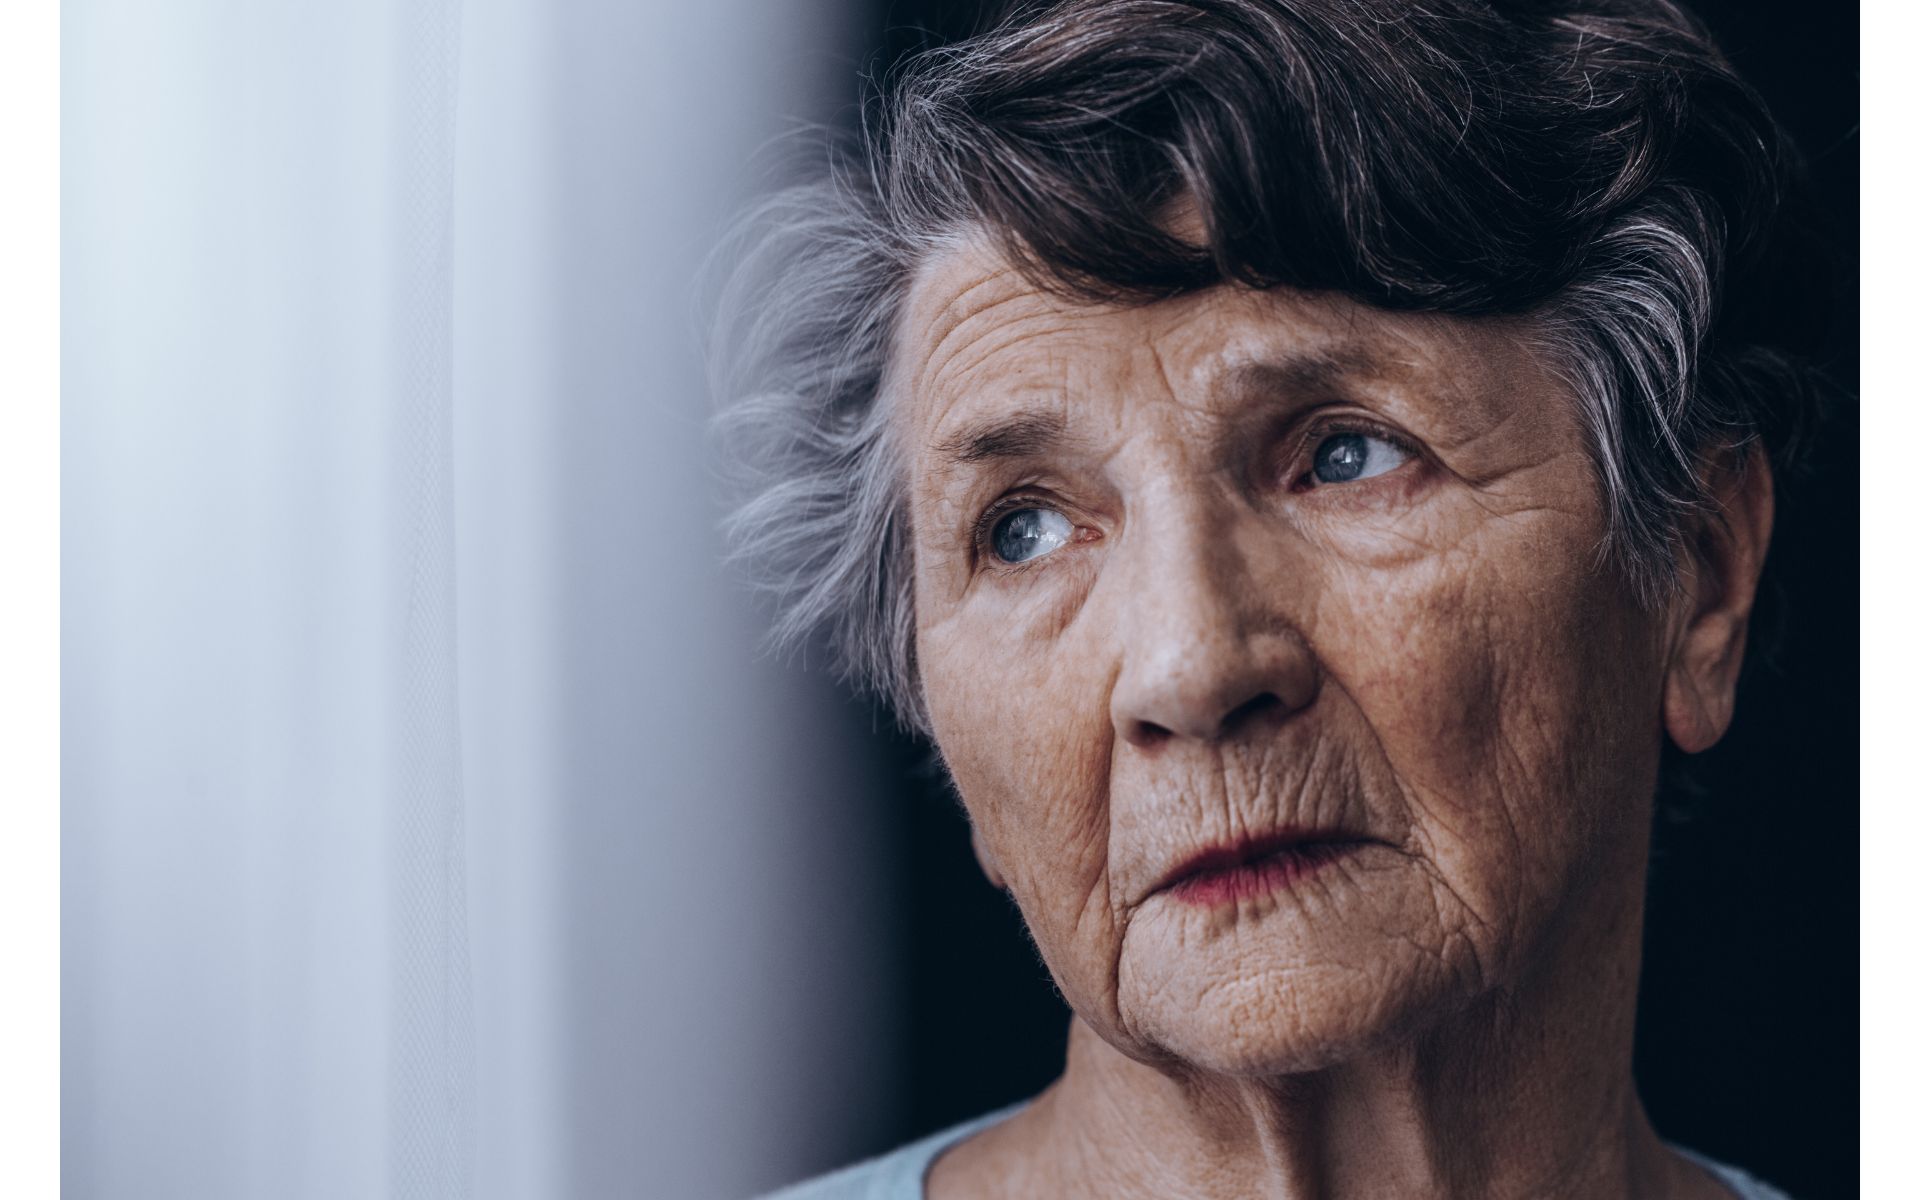 Woman looking sad. Article about 7 stages of grief in seniors.